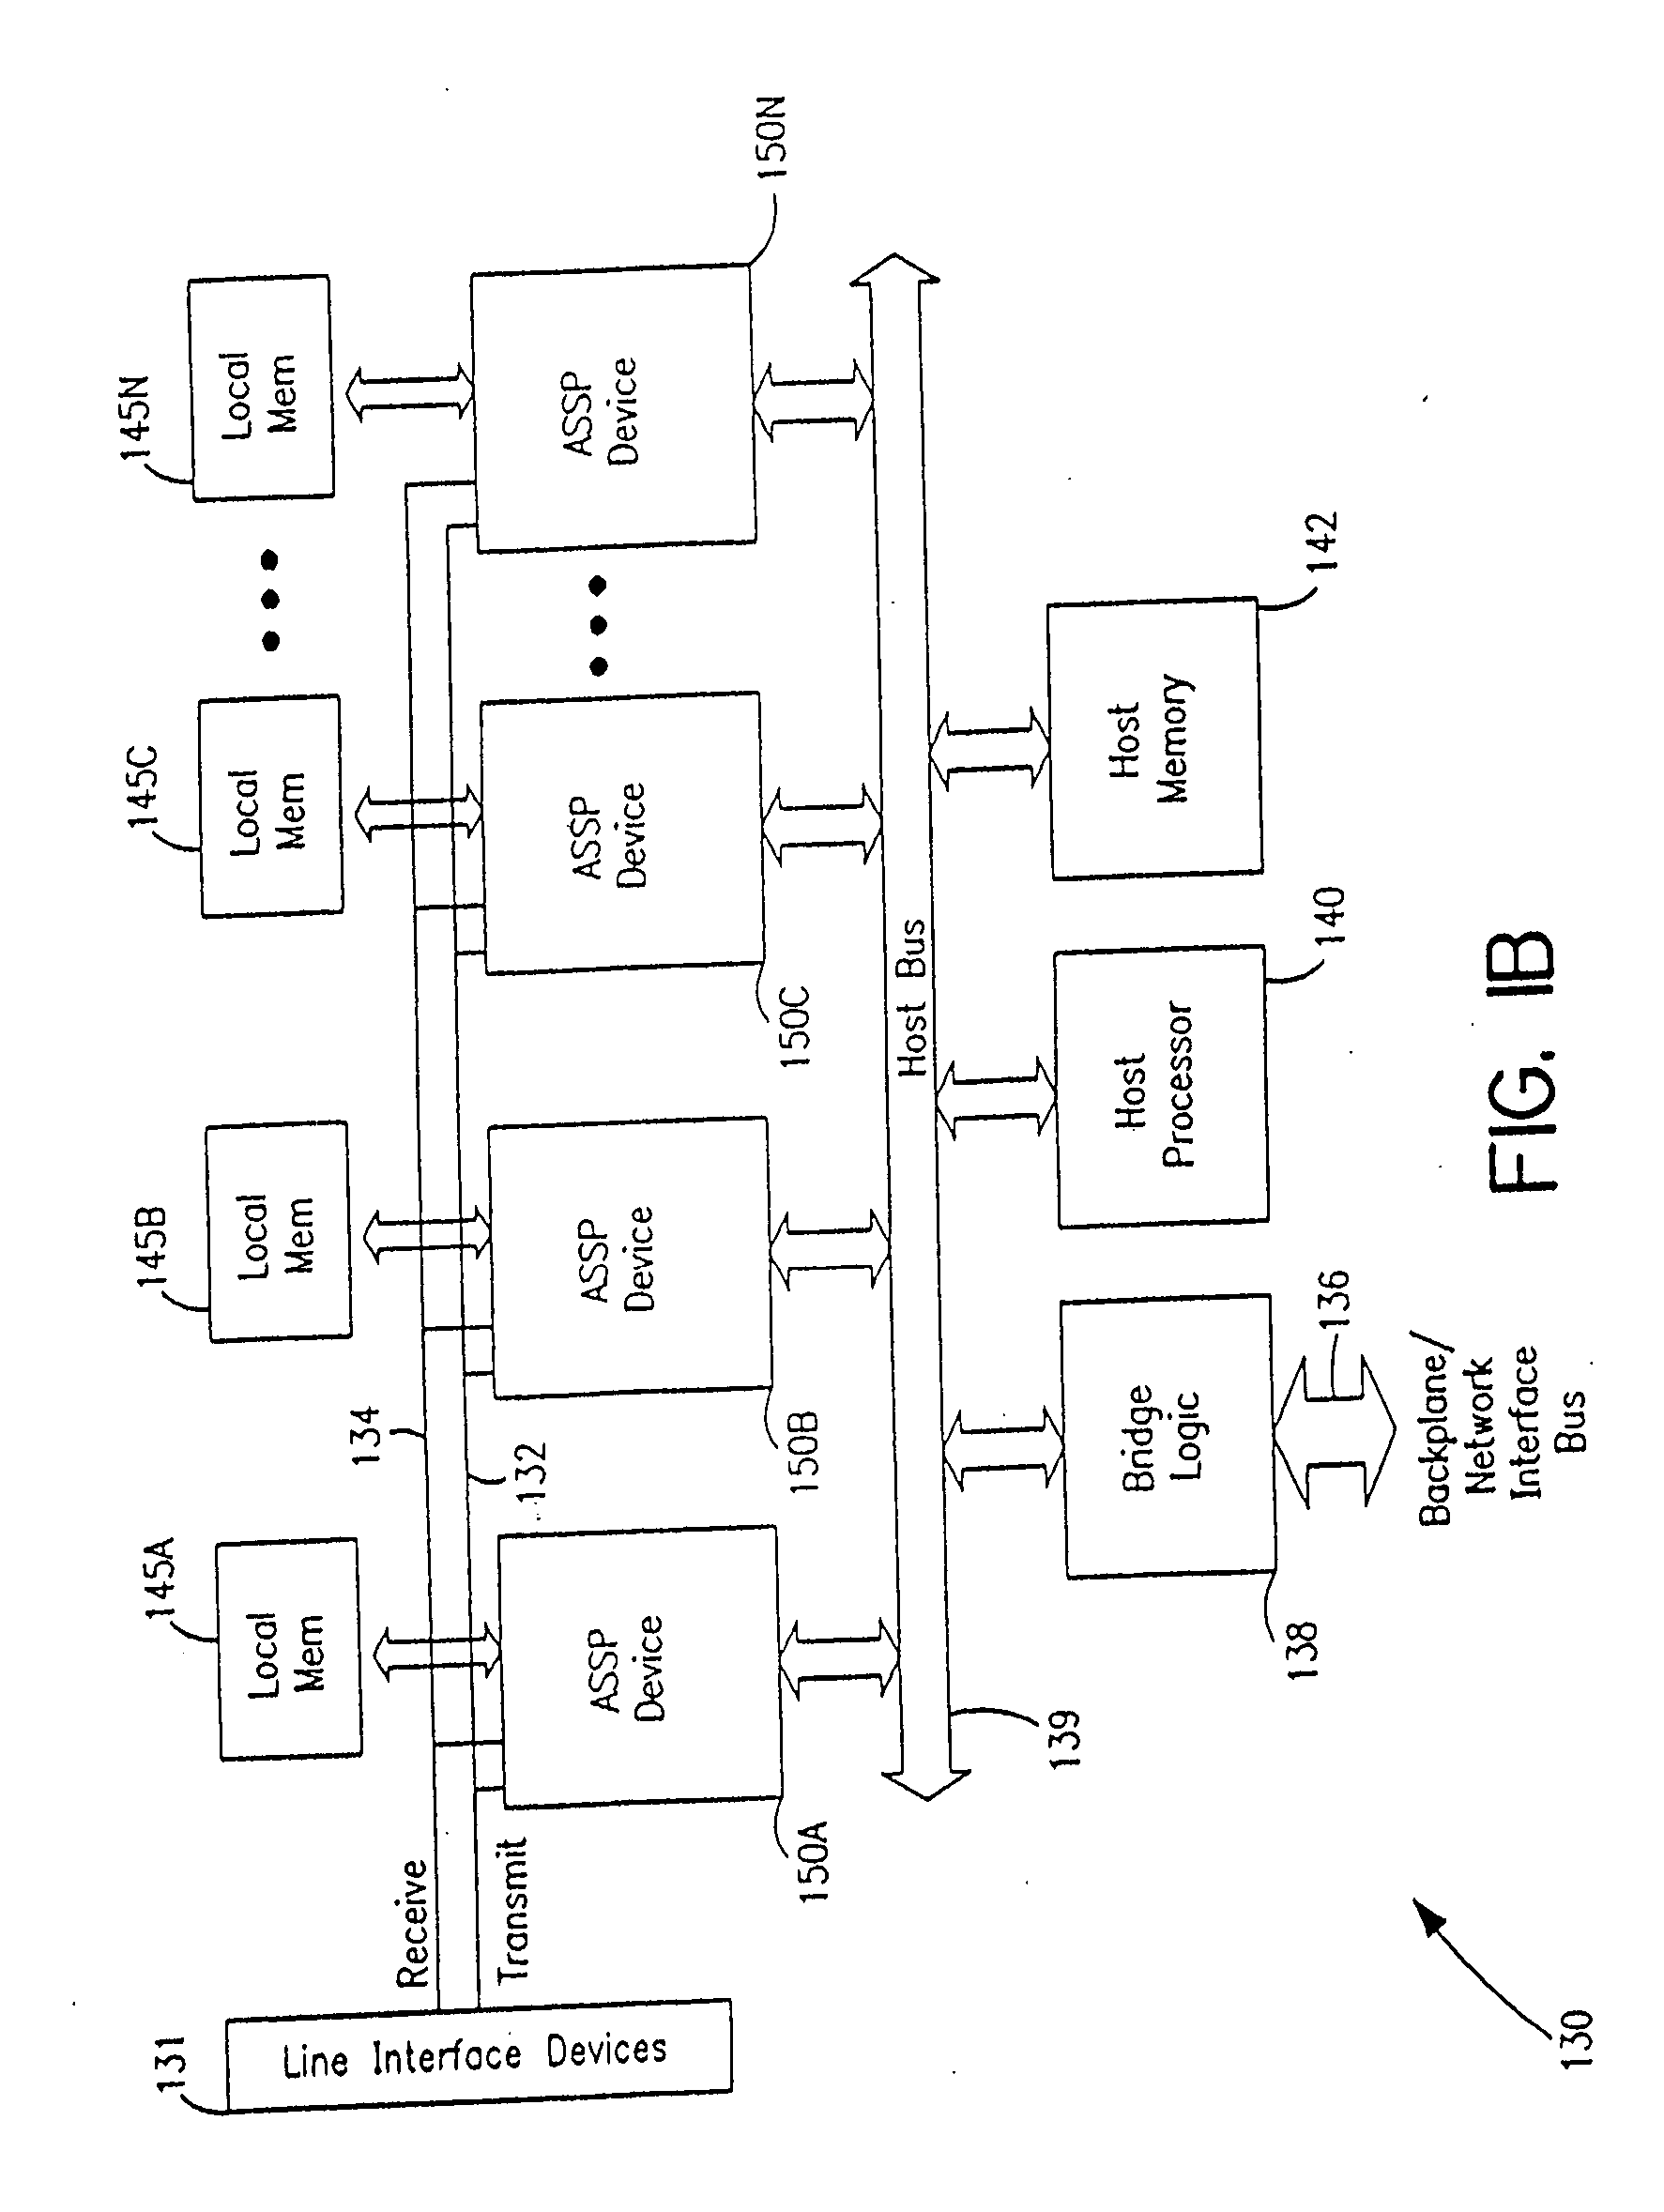 Unified instruction pipeline for power reduction in a digital signal processor integrated circuit